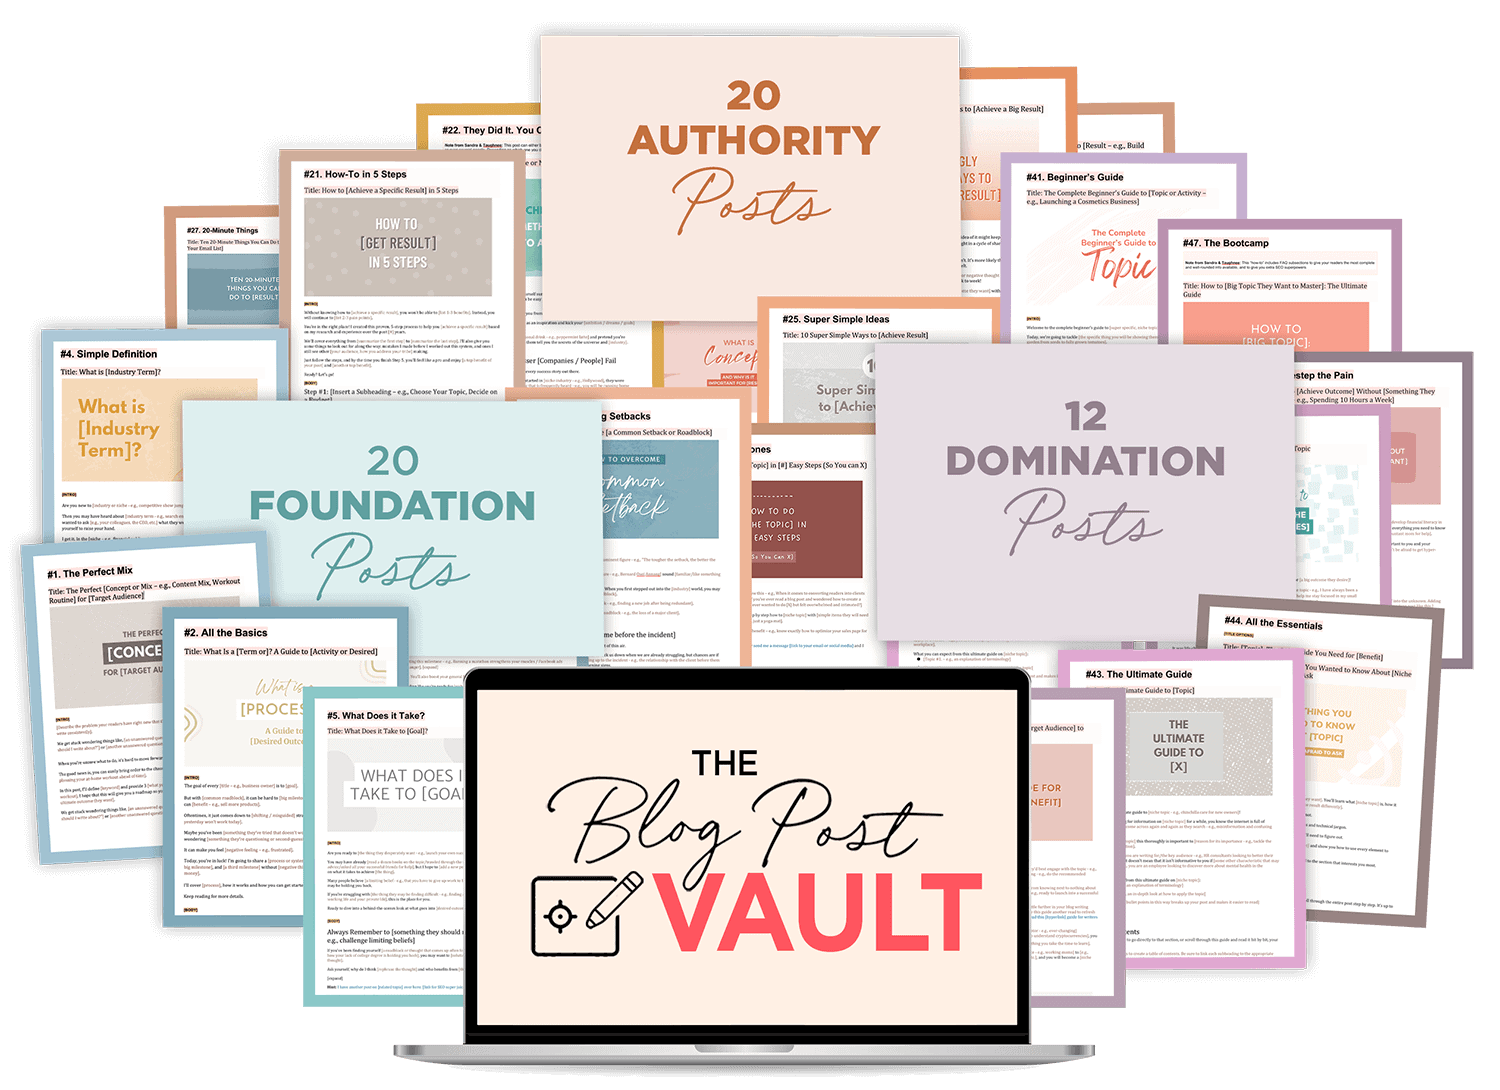 The Blog Post Vault by ConversionMinded